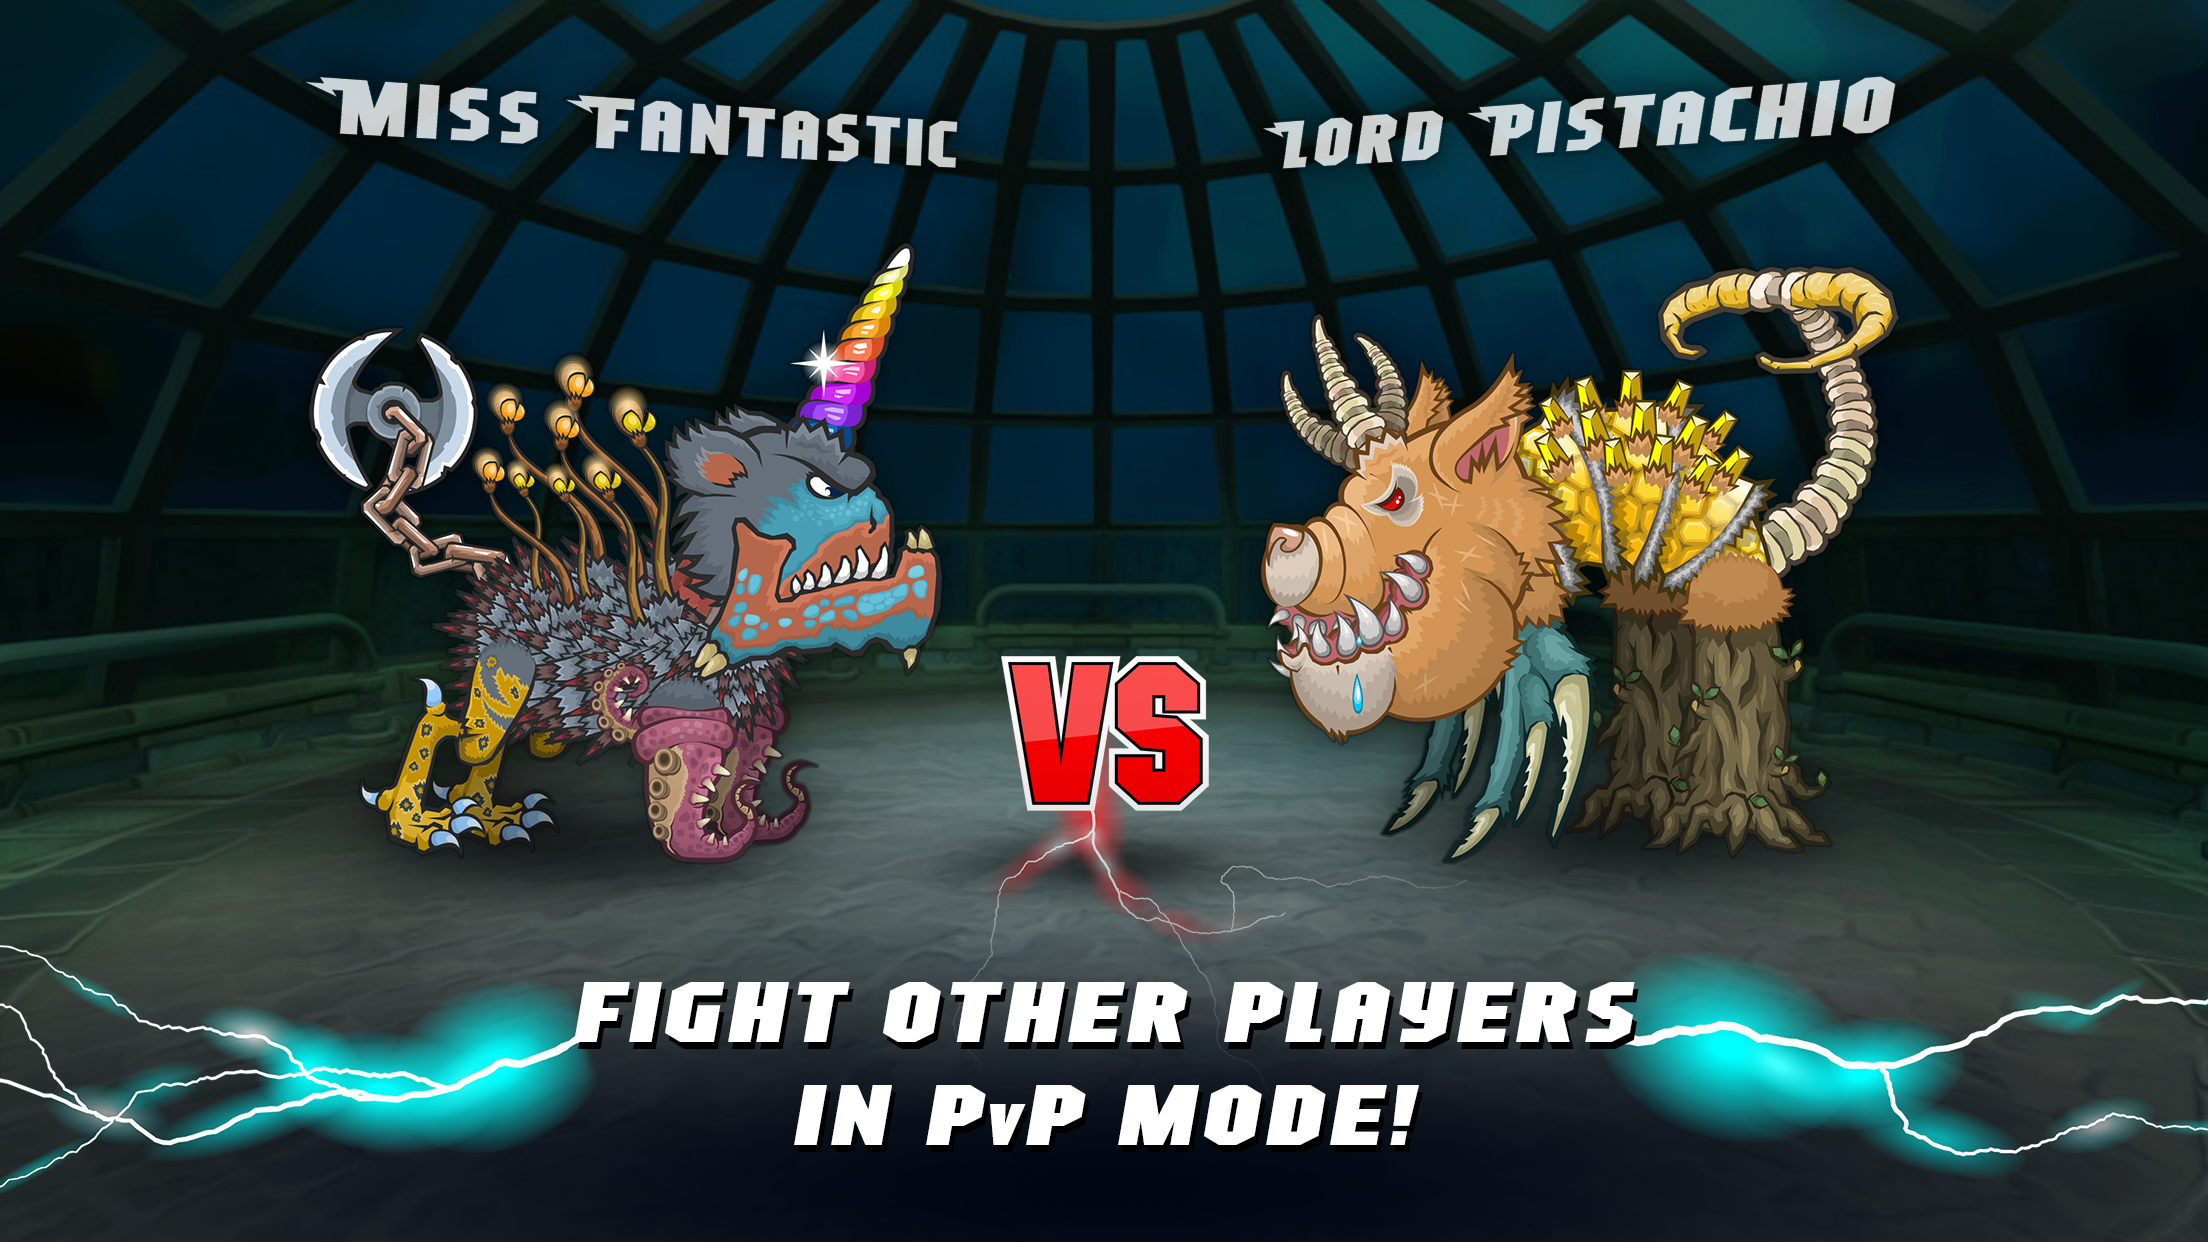 Mutant Fighting Cup 2 MOD APK free download